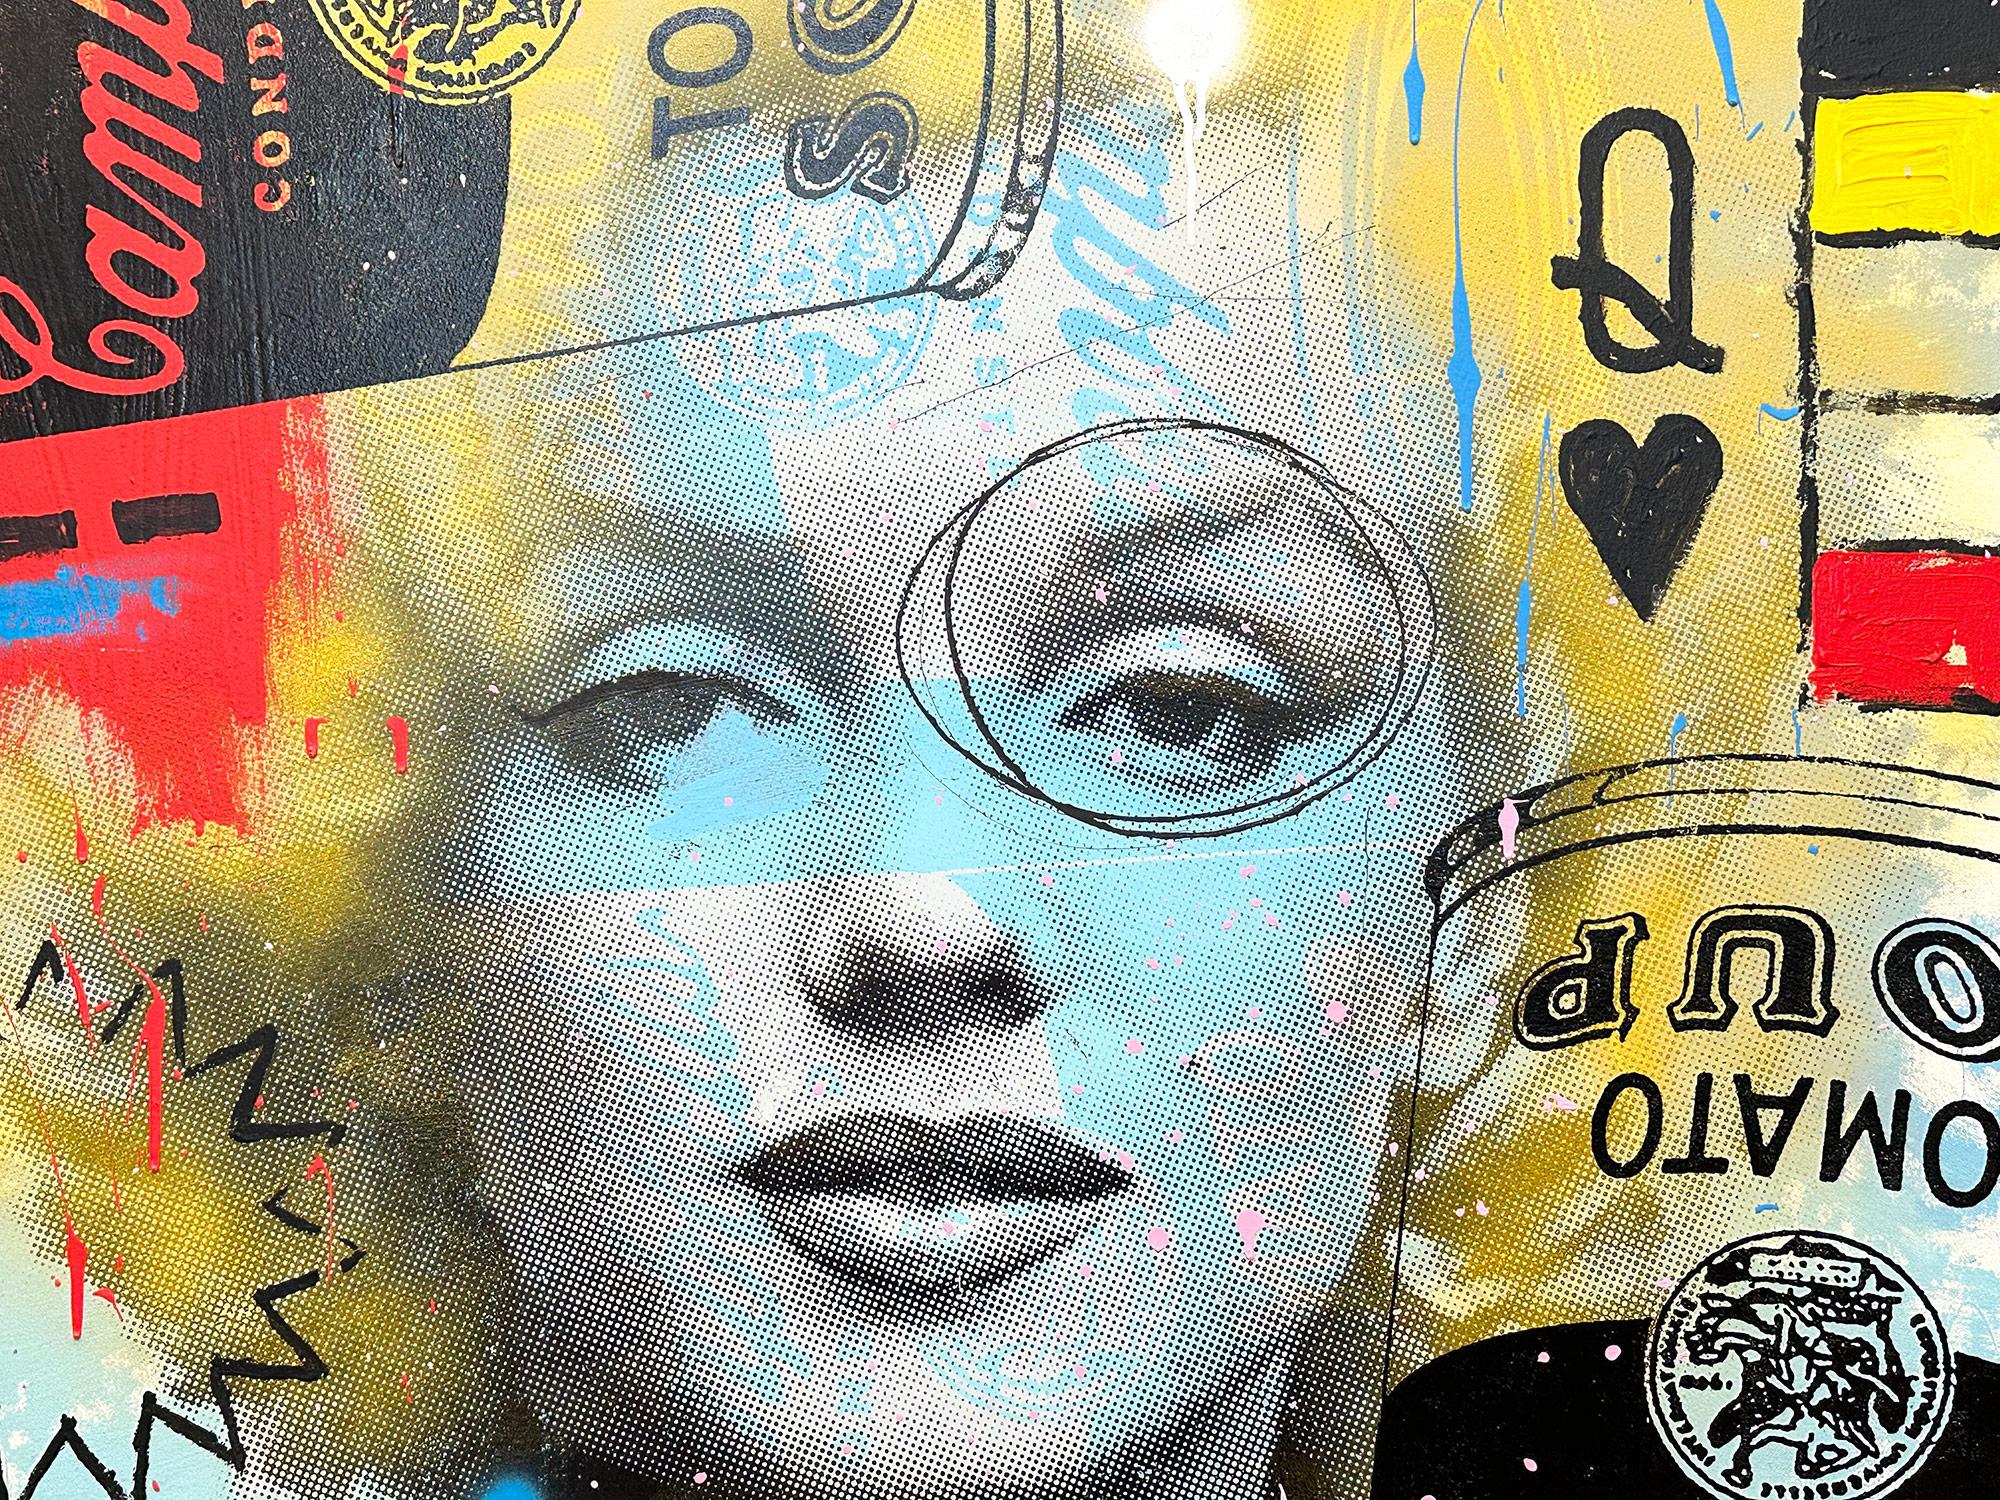 A pop piece depicting Marilyn Monroe juxtaposed with Andy Warhols iconic Campbells Soup. With impasto painting, and quick brushwork we are drawn to the movement, as the artist is able to engage his viewer with contrasting highlights and shadow. Done